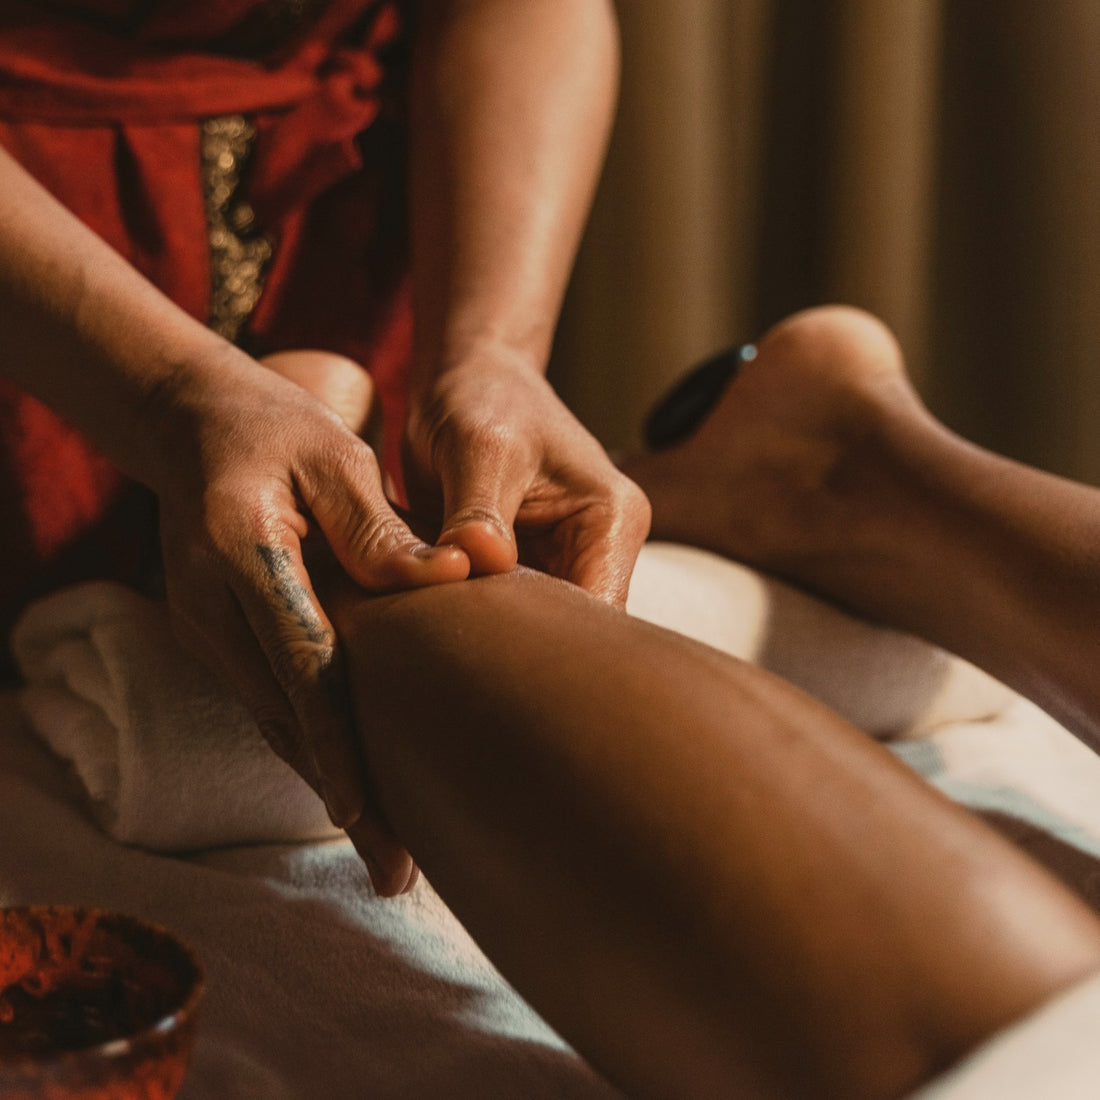 Should You Massage Muscle Spasms?